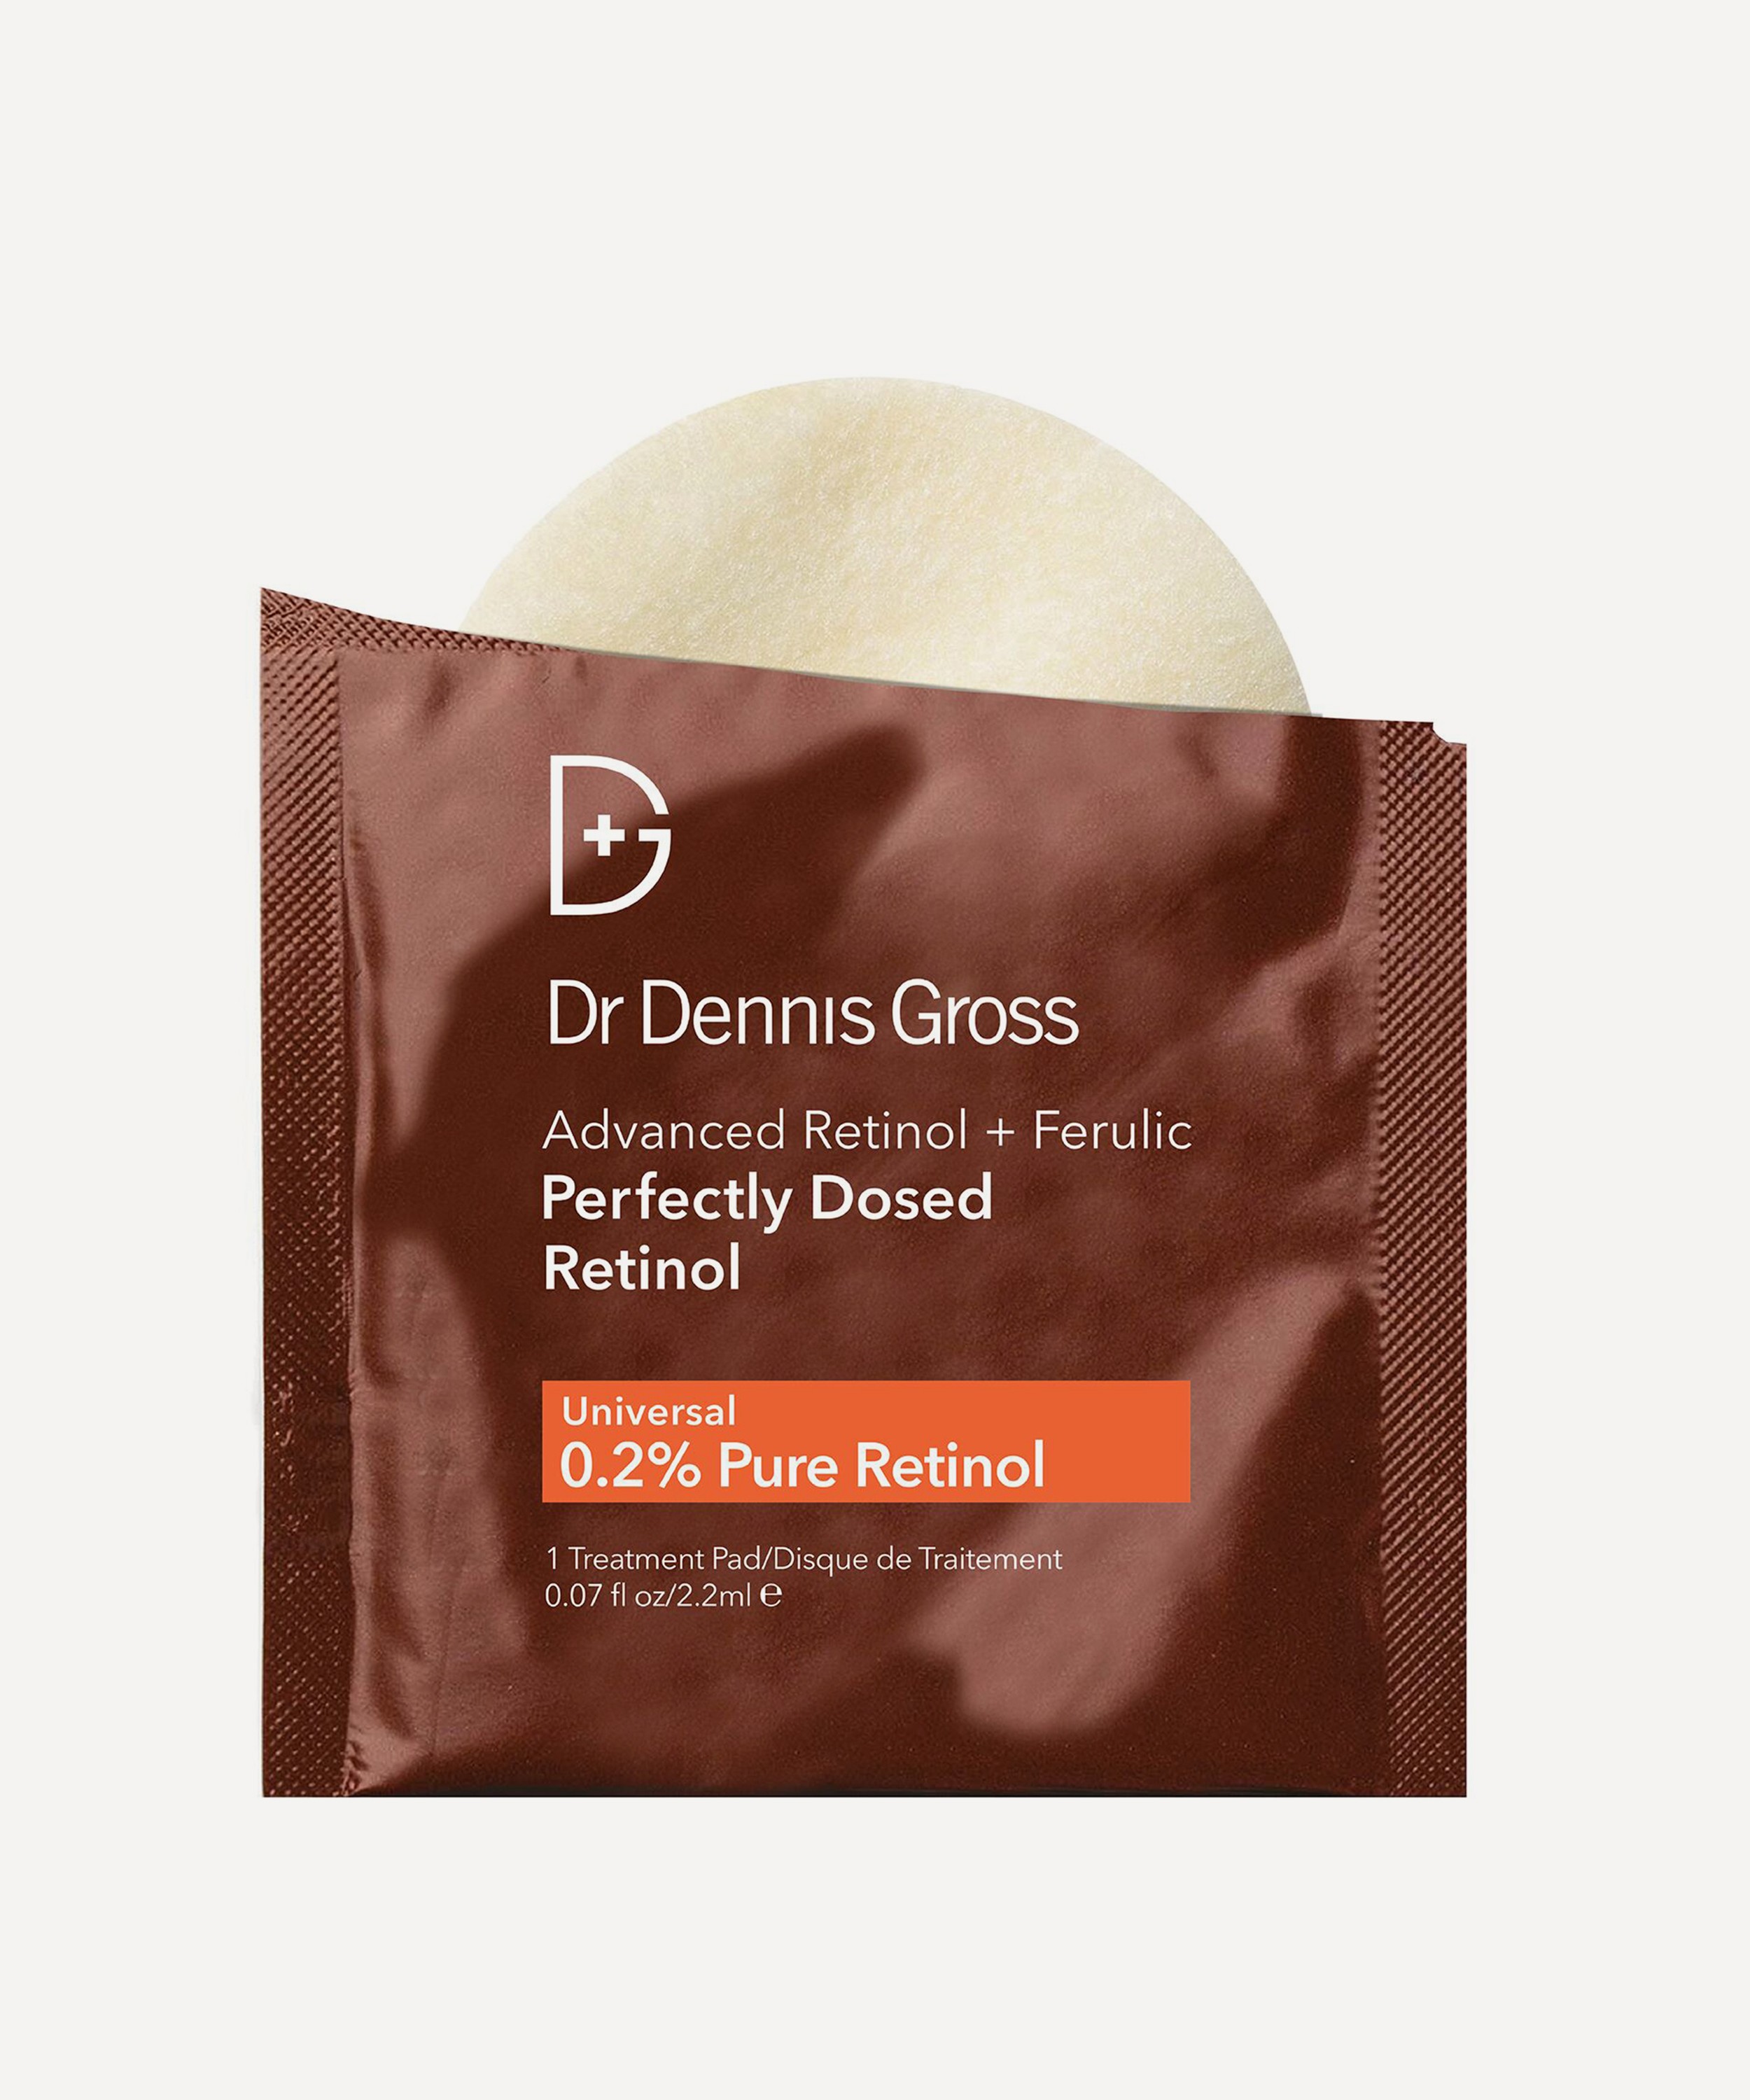 Dr. Dennis Gross Skincare - Advanced Retinol and Ferulic Perfectly Dosed Treatment Pack of 8